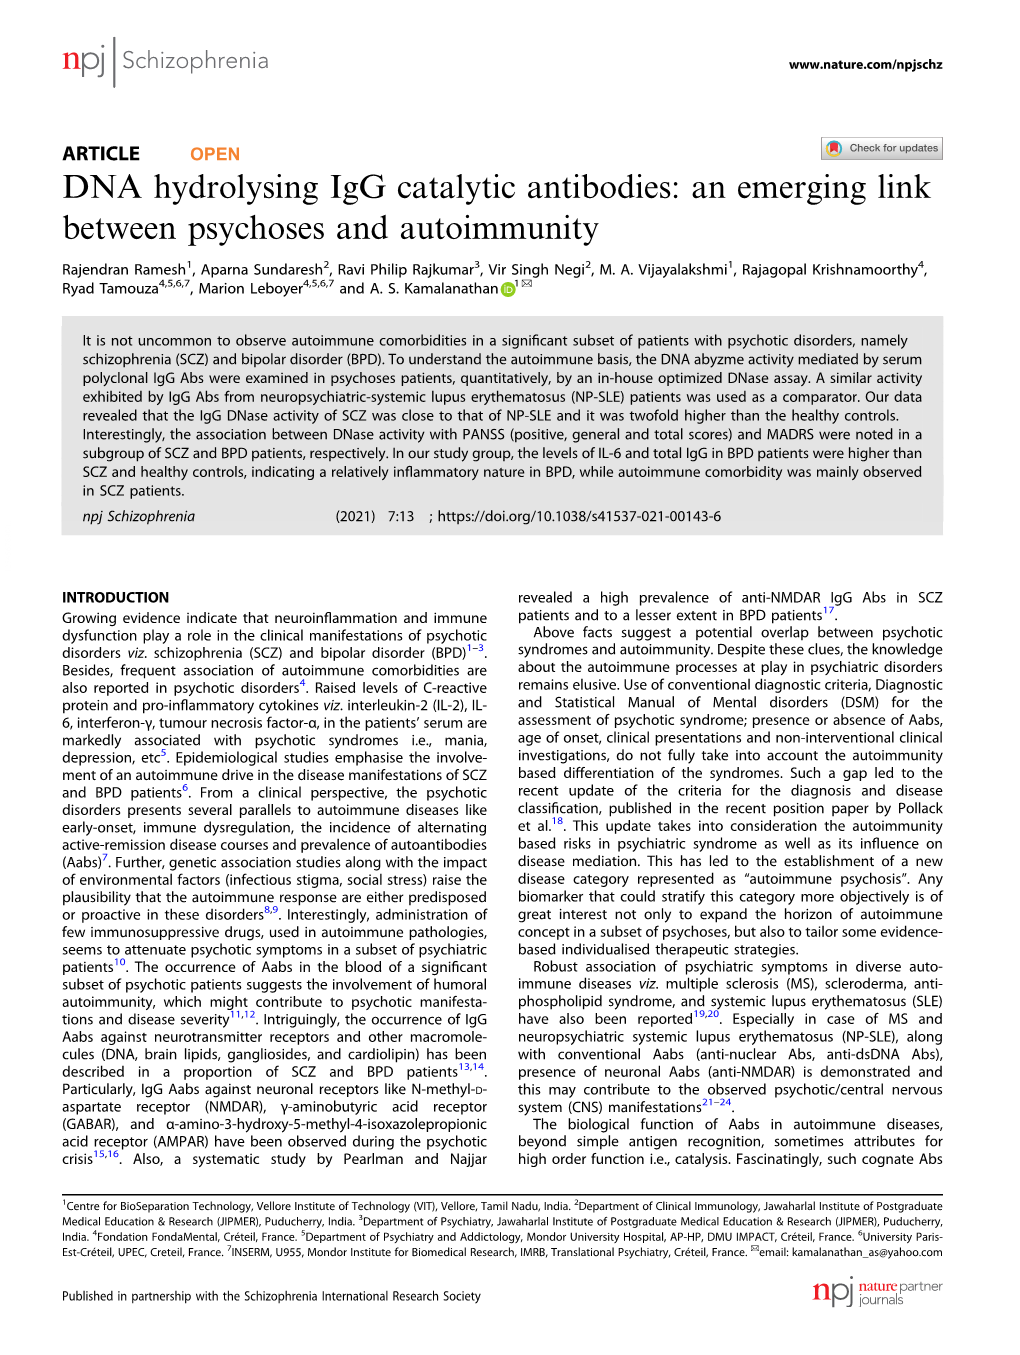 DNA Hydrolysing Igg Catalytic Antibodies: an Emerging Link Between Psychoses and Autoimmunity